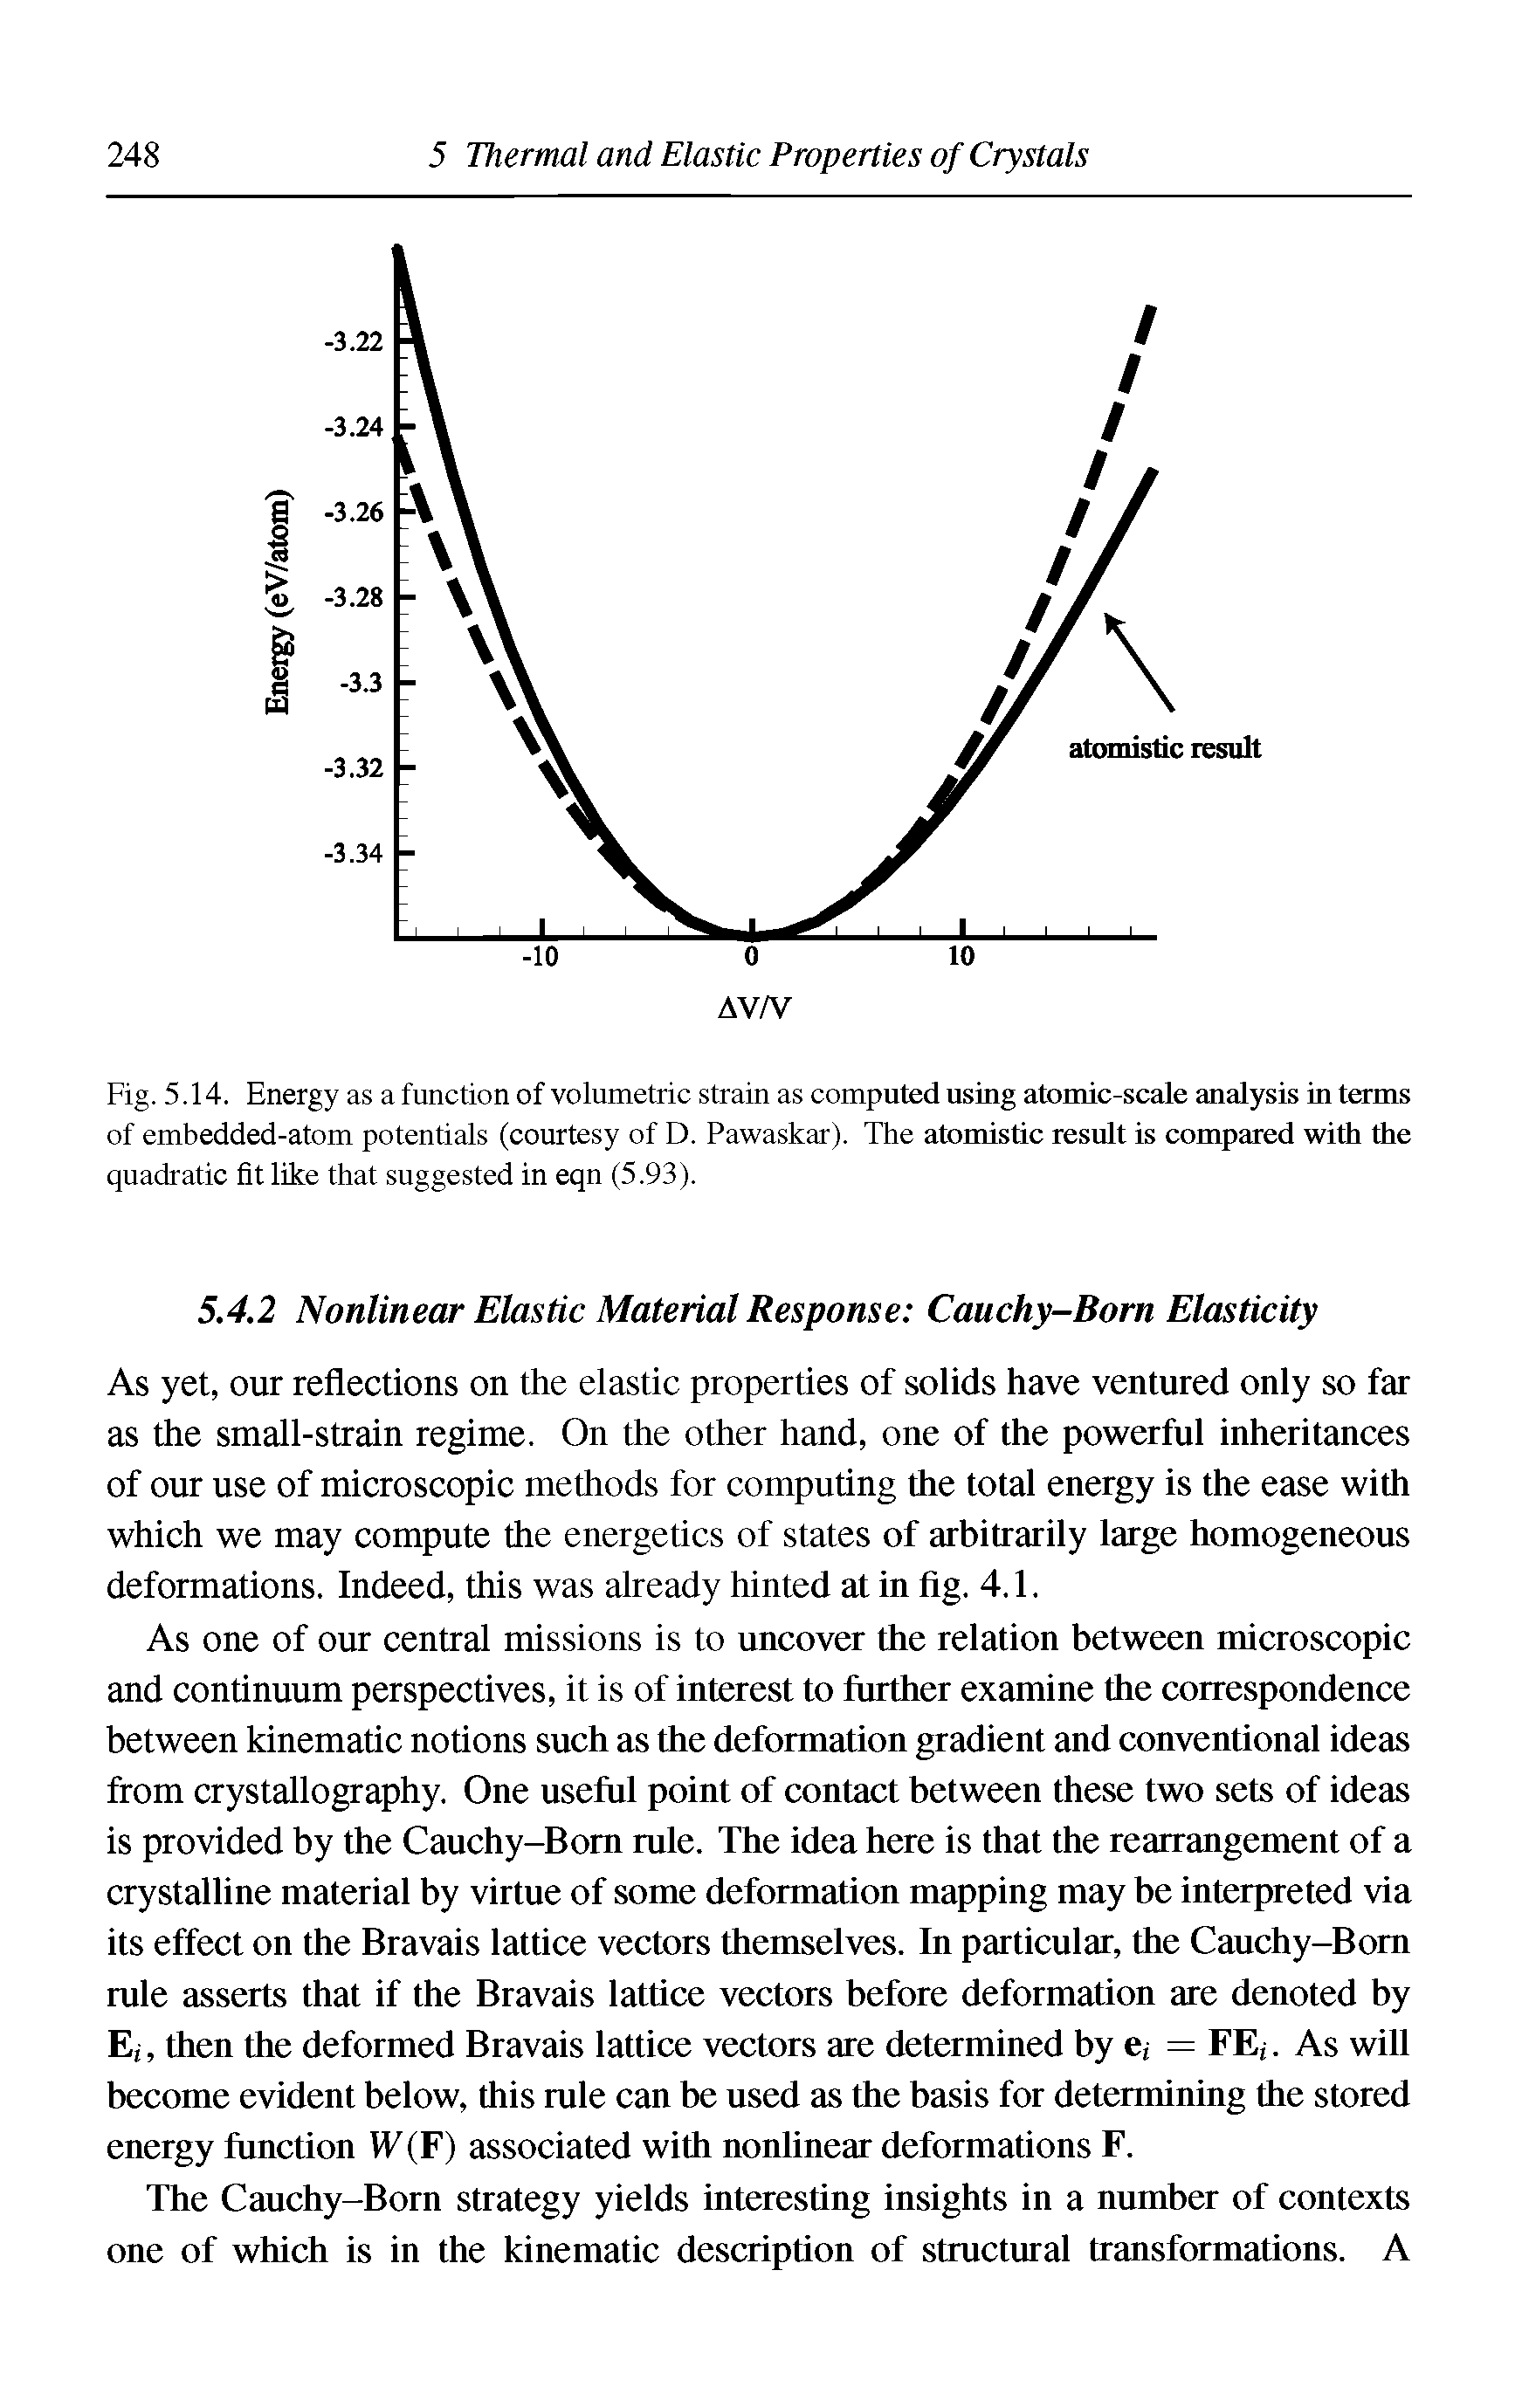 Fig. 5.14. Energy as a function of volumetric strain as computed using atomic-scale analysis in terms of embedded-atom potentials (courtesy of D. Pawaskar). The atomistic result is compared with the quadratic fit like that suggested in eqn (5.93).